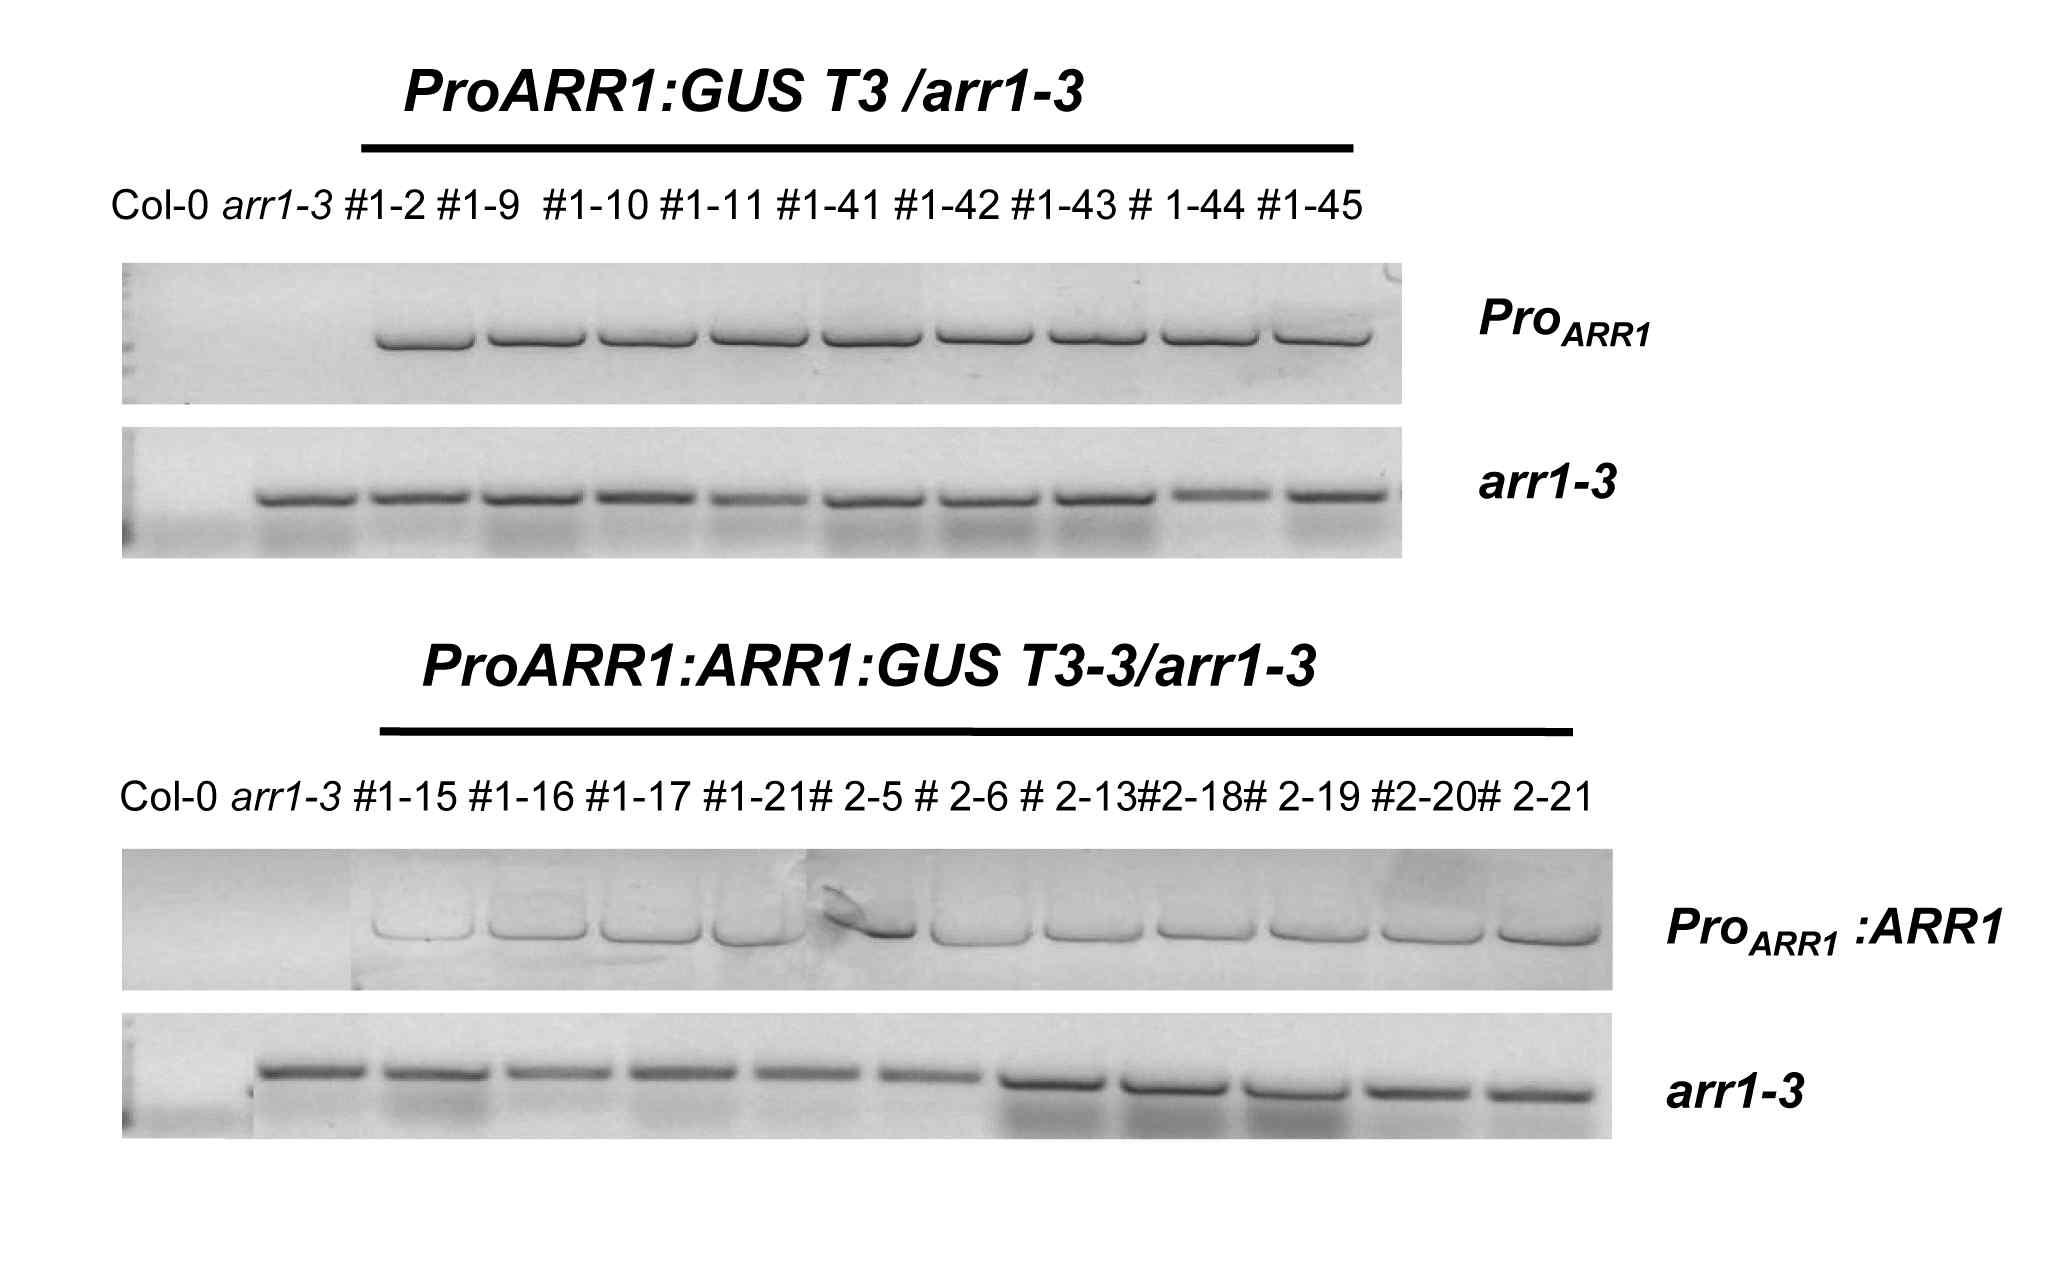 Genotyping of ProARR1:GUS and ProARR1:ARR1:GUS transgenic plants.